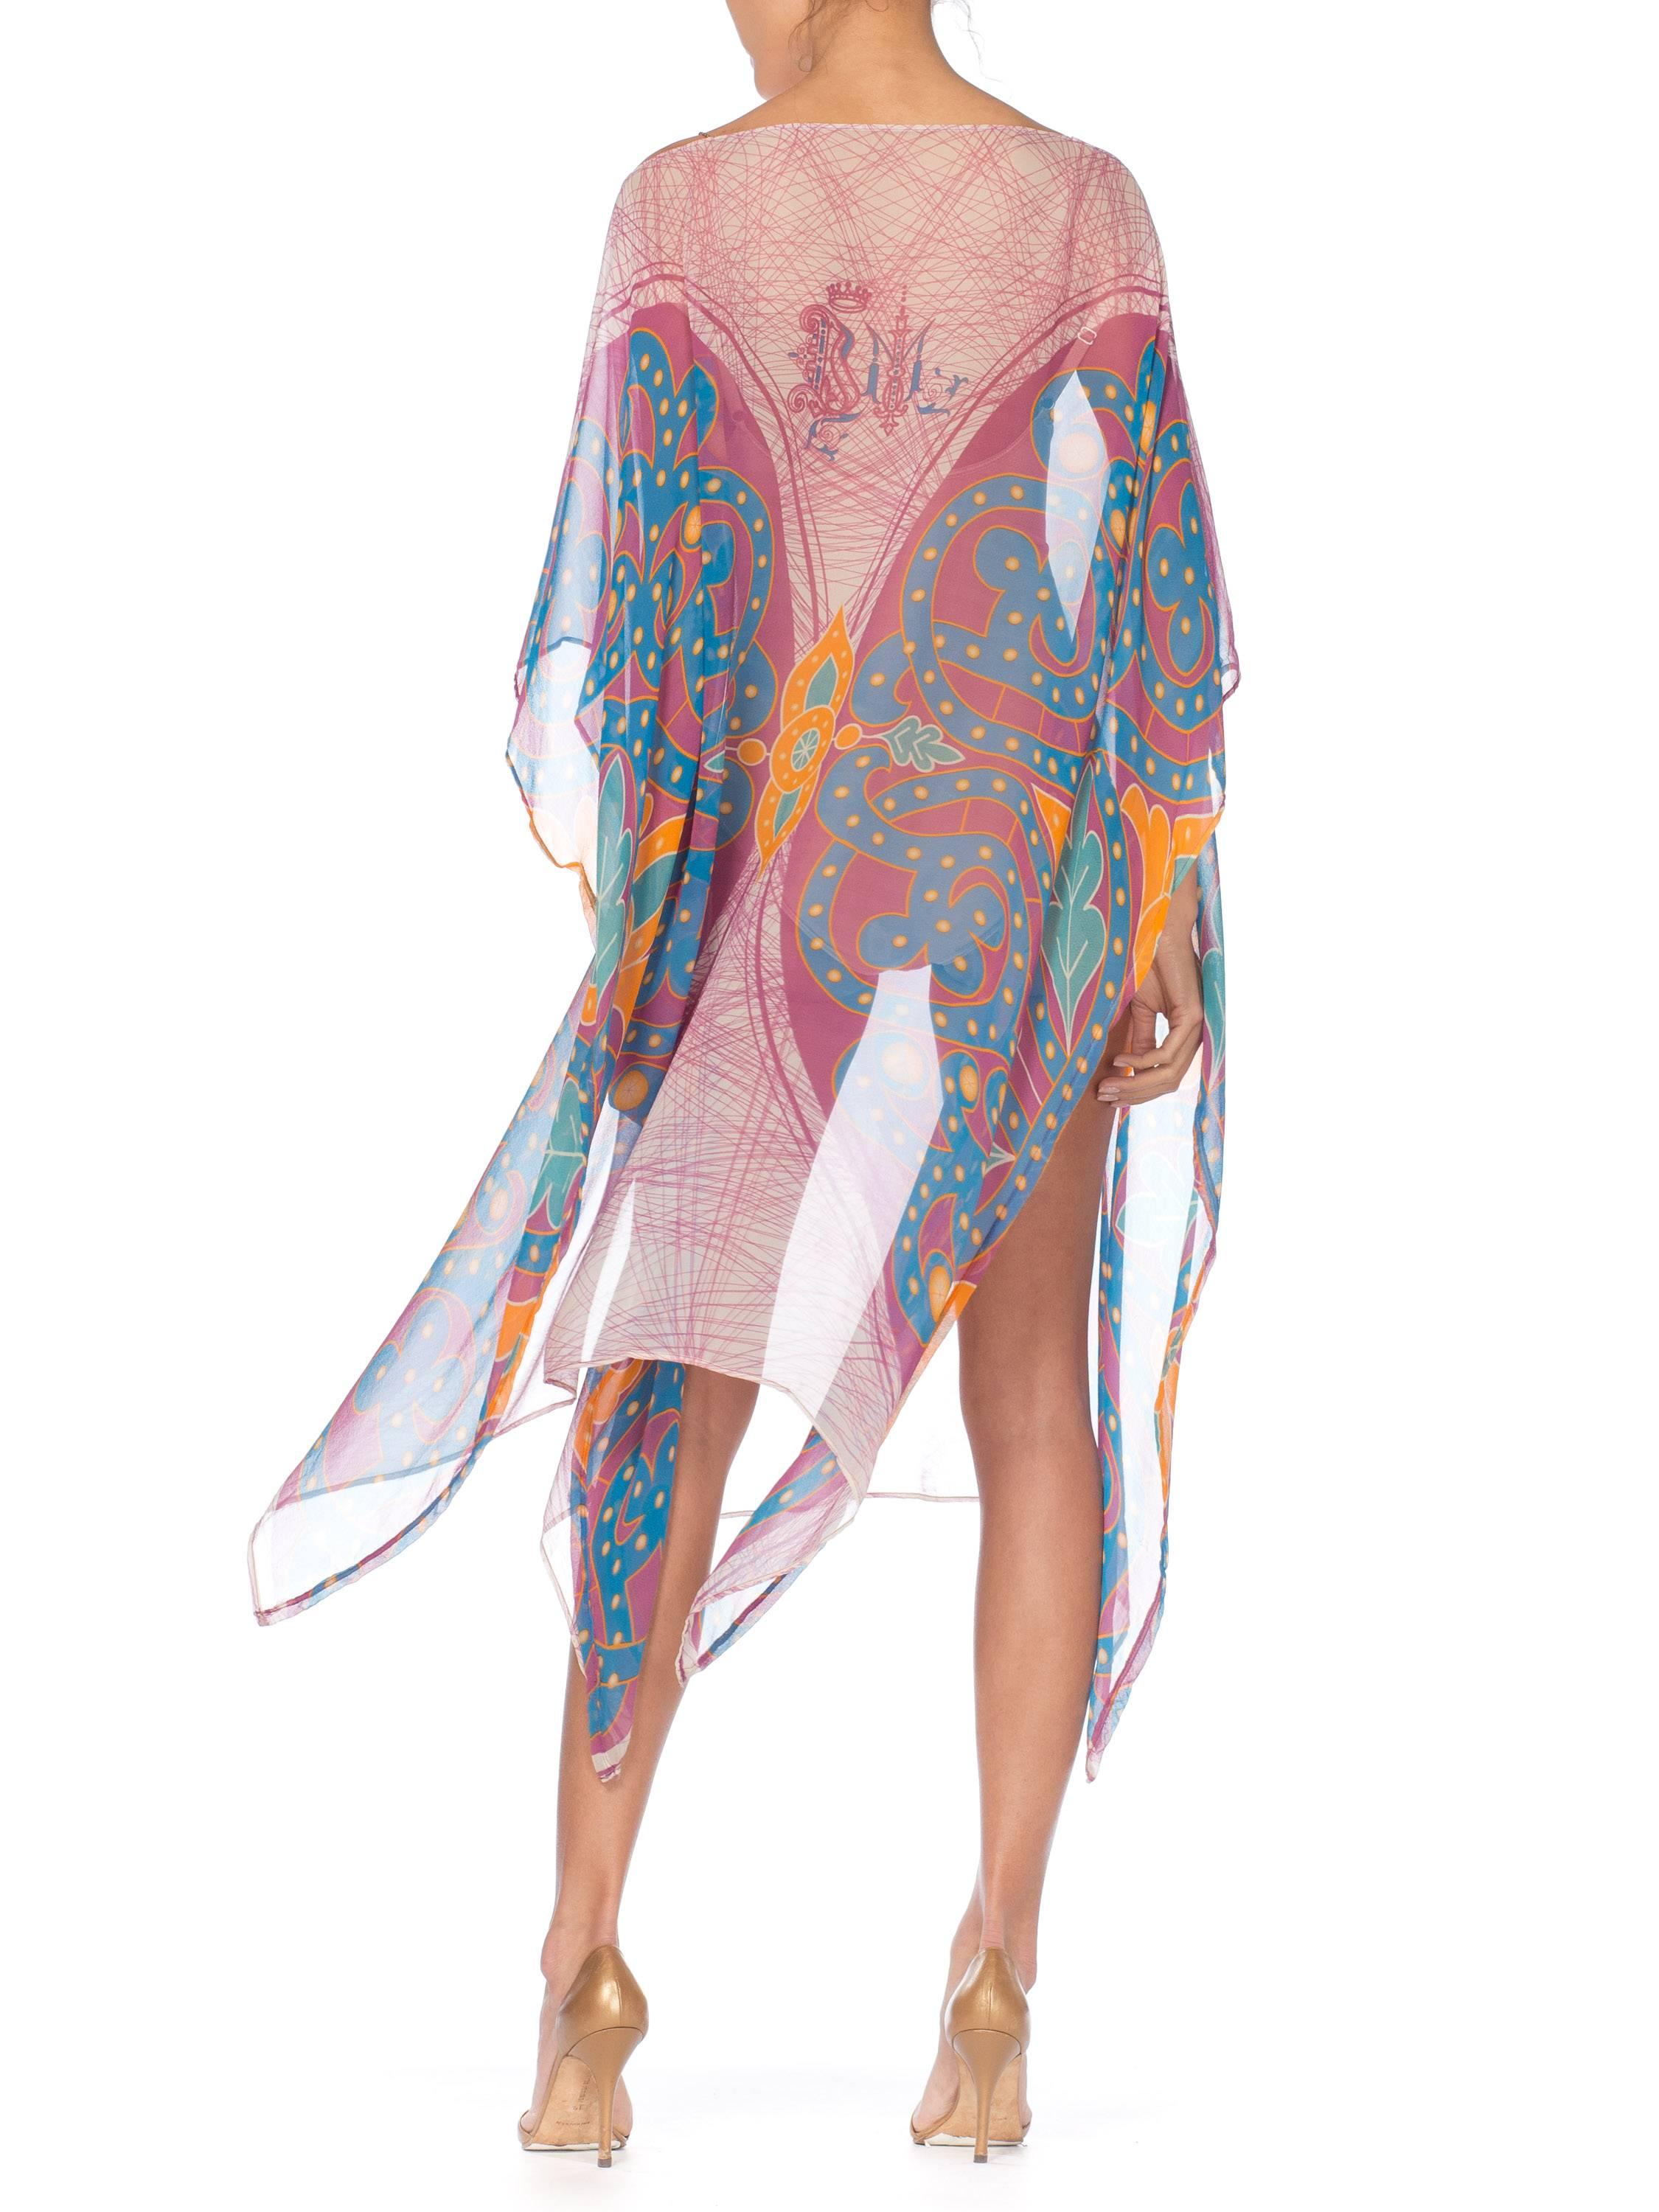 MORPHEW COLLECTION Pink  & Orange Silk Chiffon Butterfly Print Kaftan With Scar For Sale 2